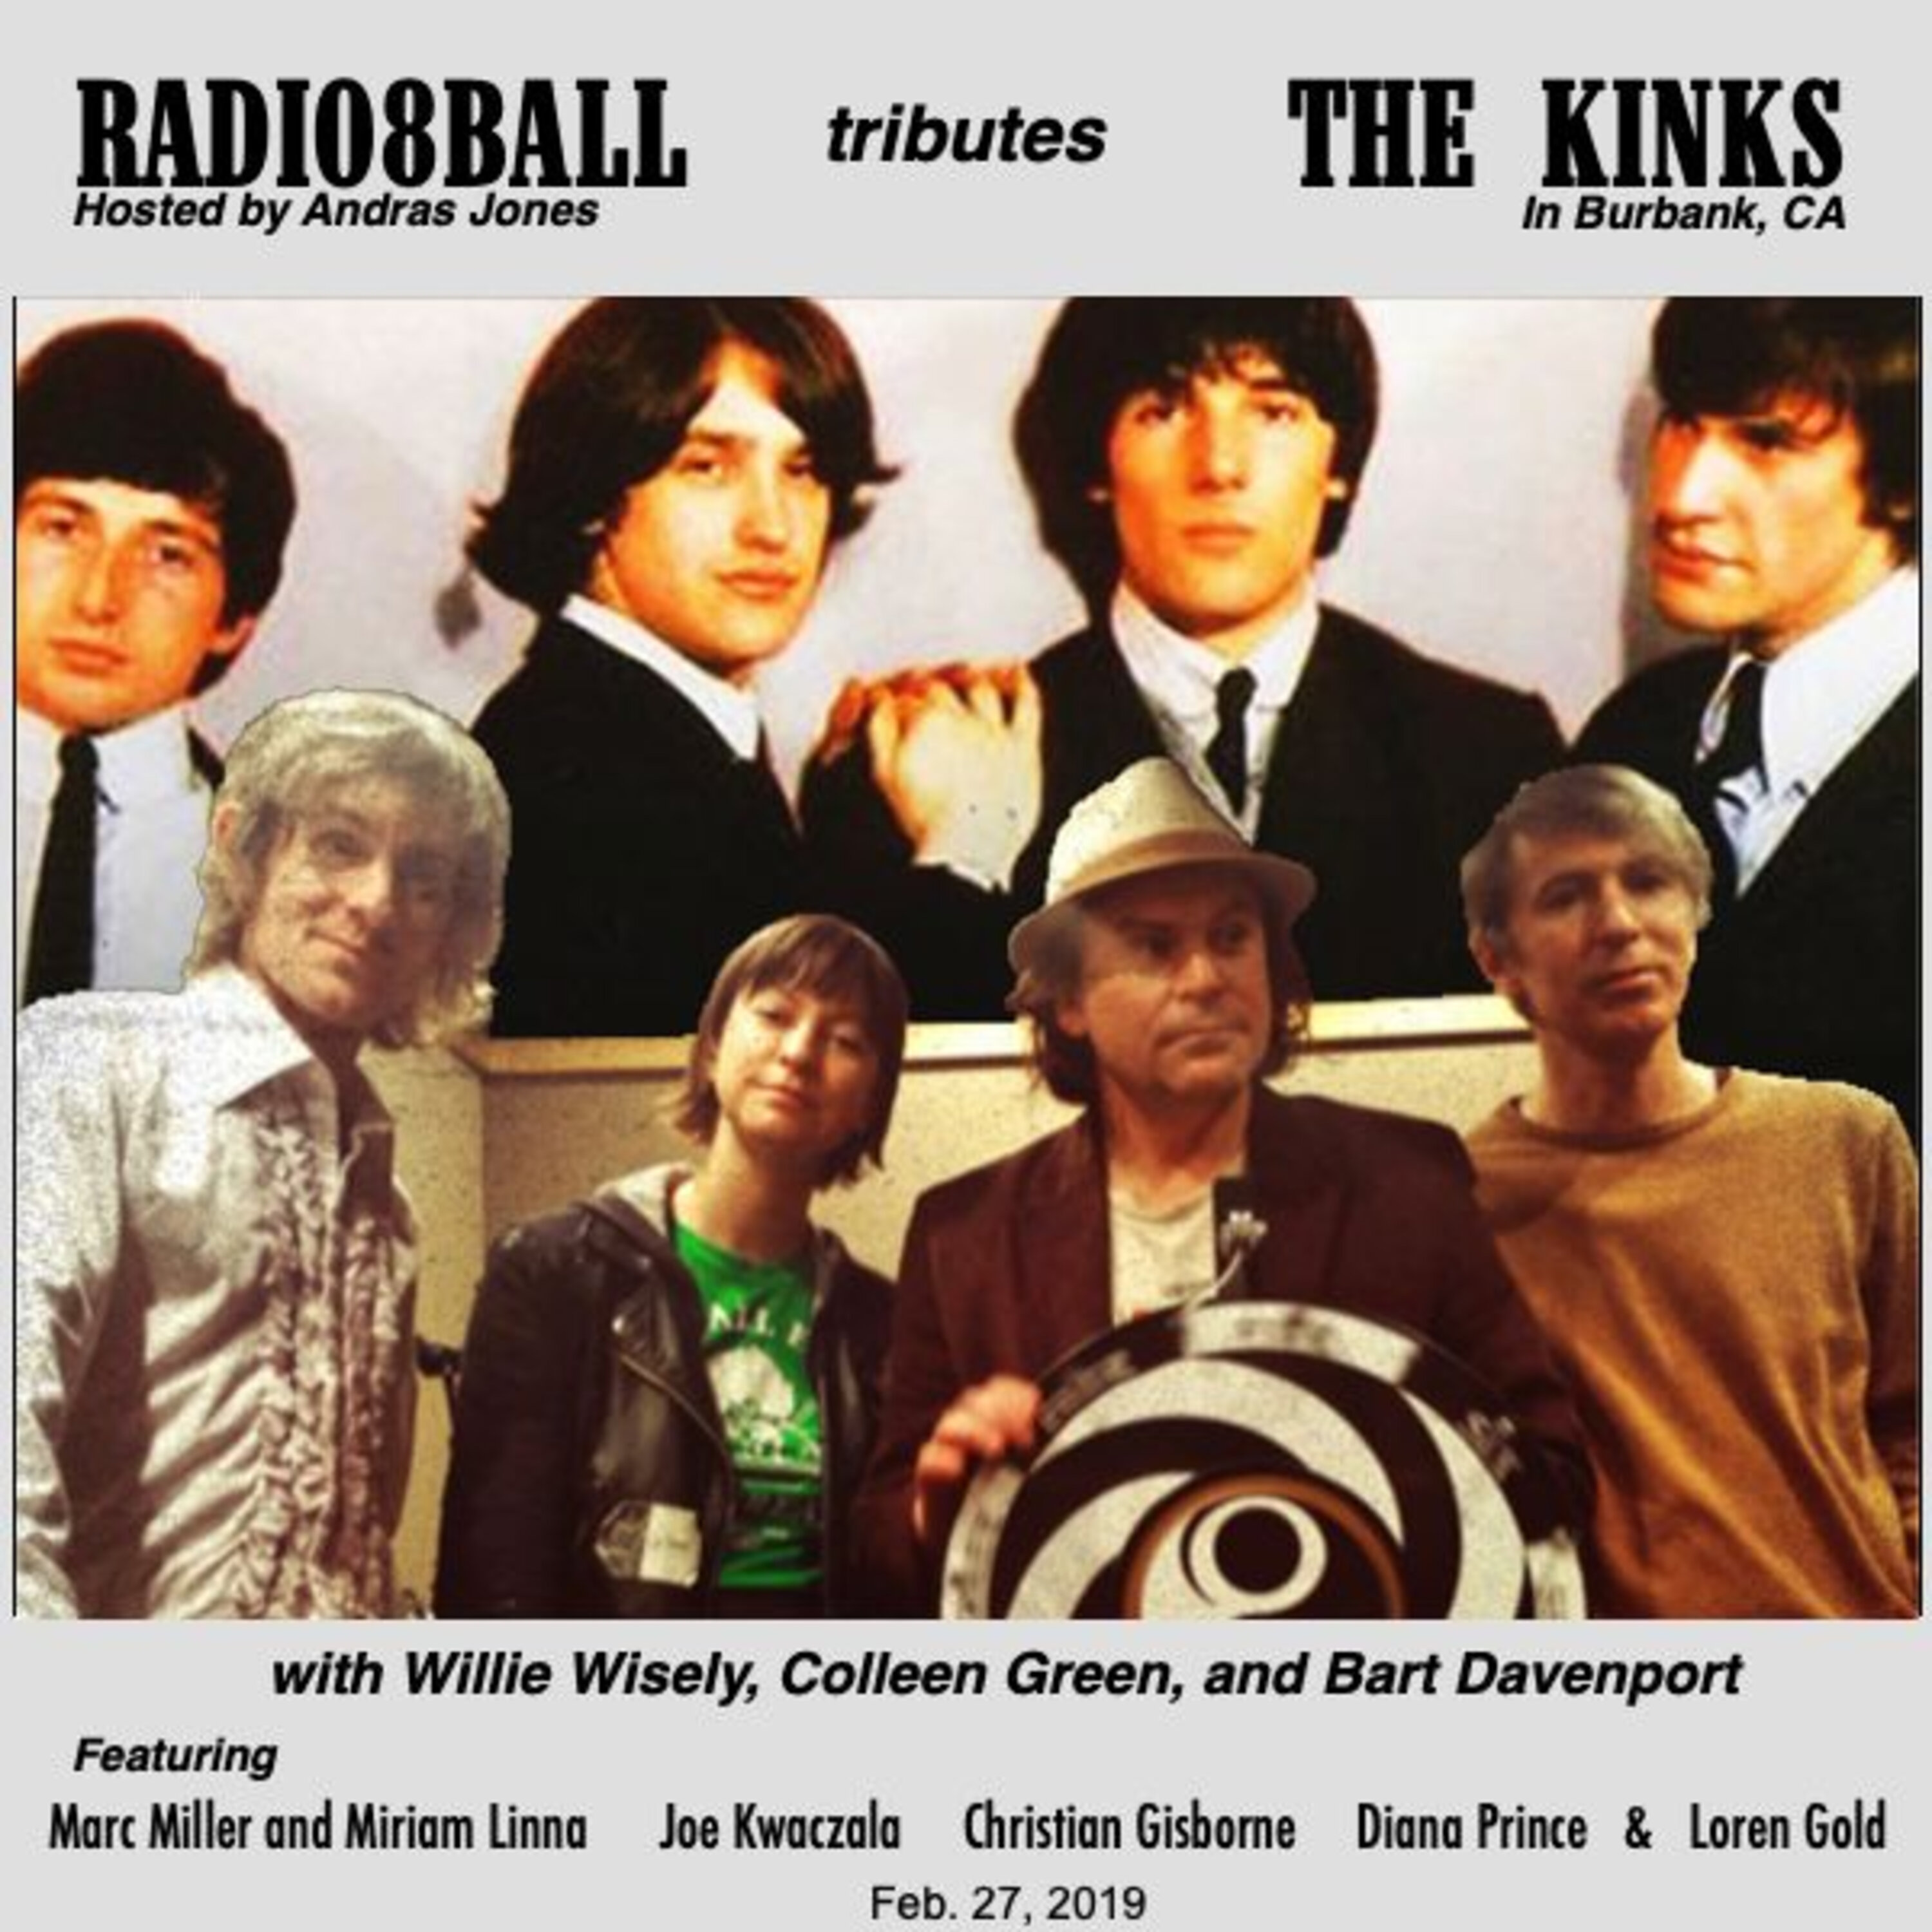 542: KINKS TRIBUTE - Willie Wisely & Colleen Green (February 27,  2019)